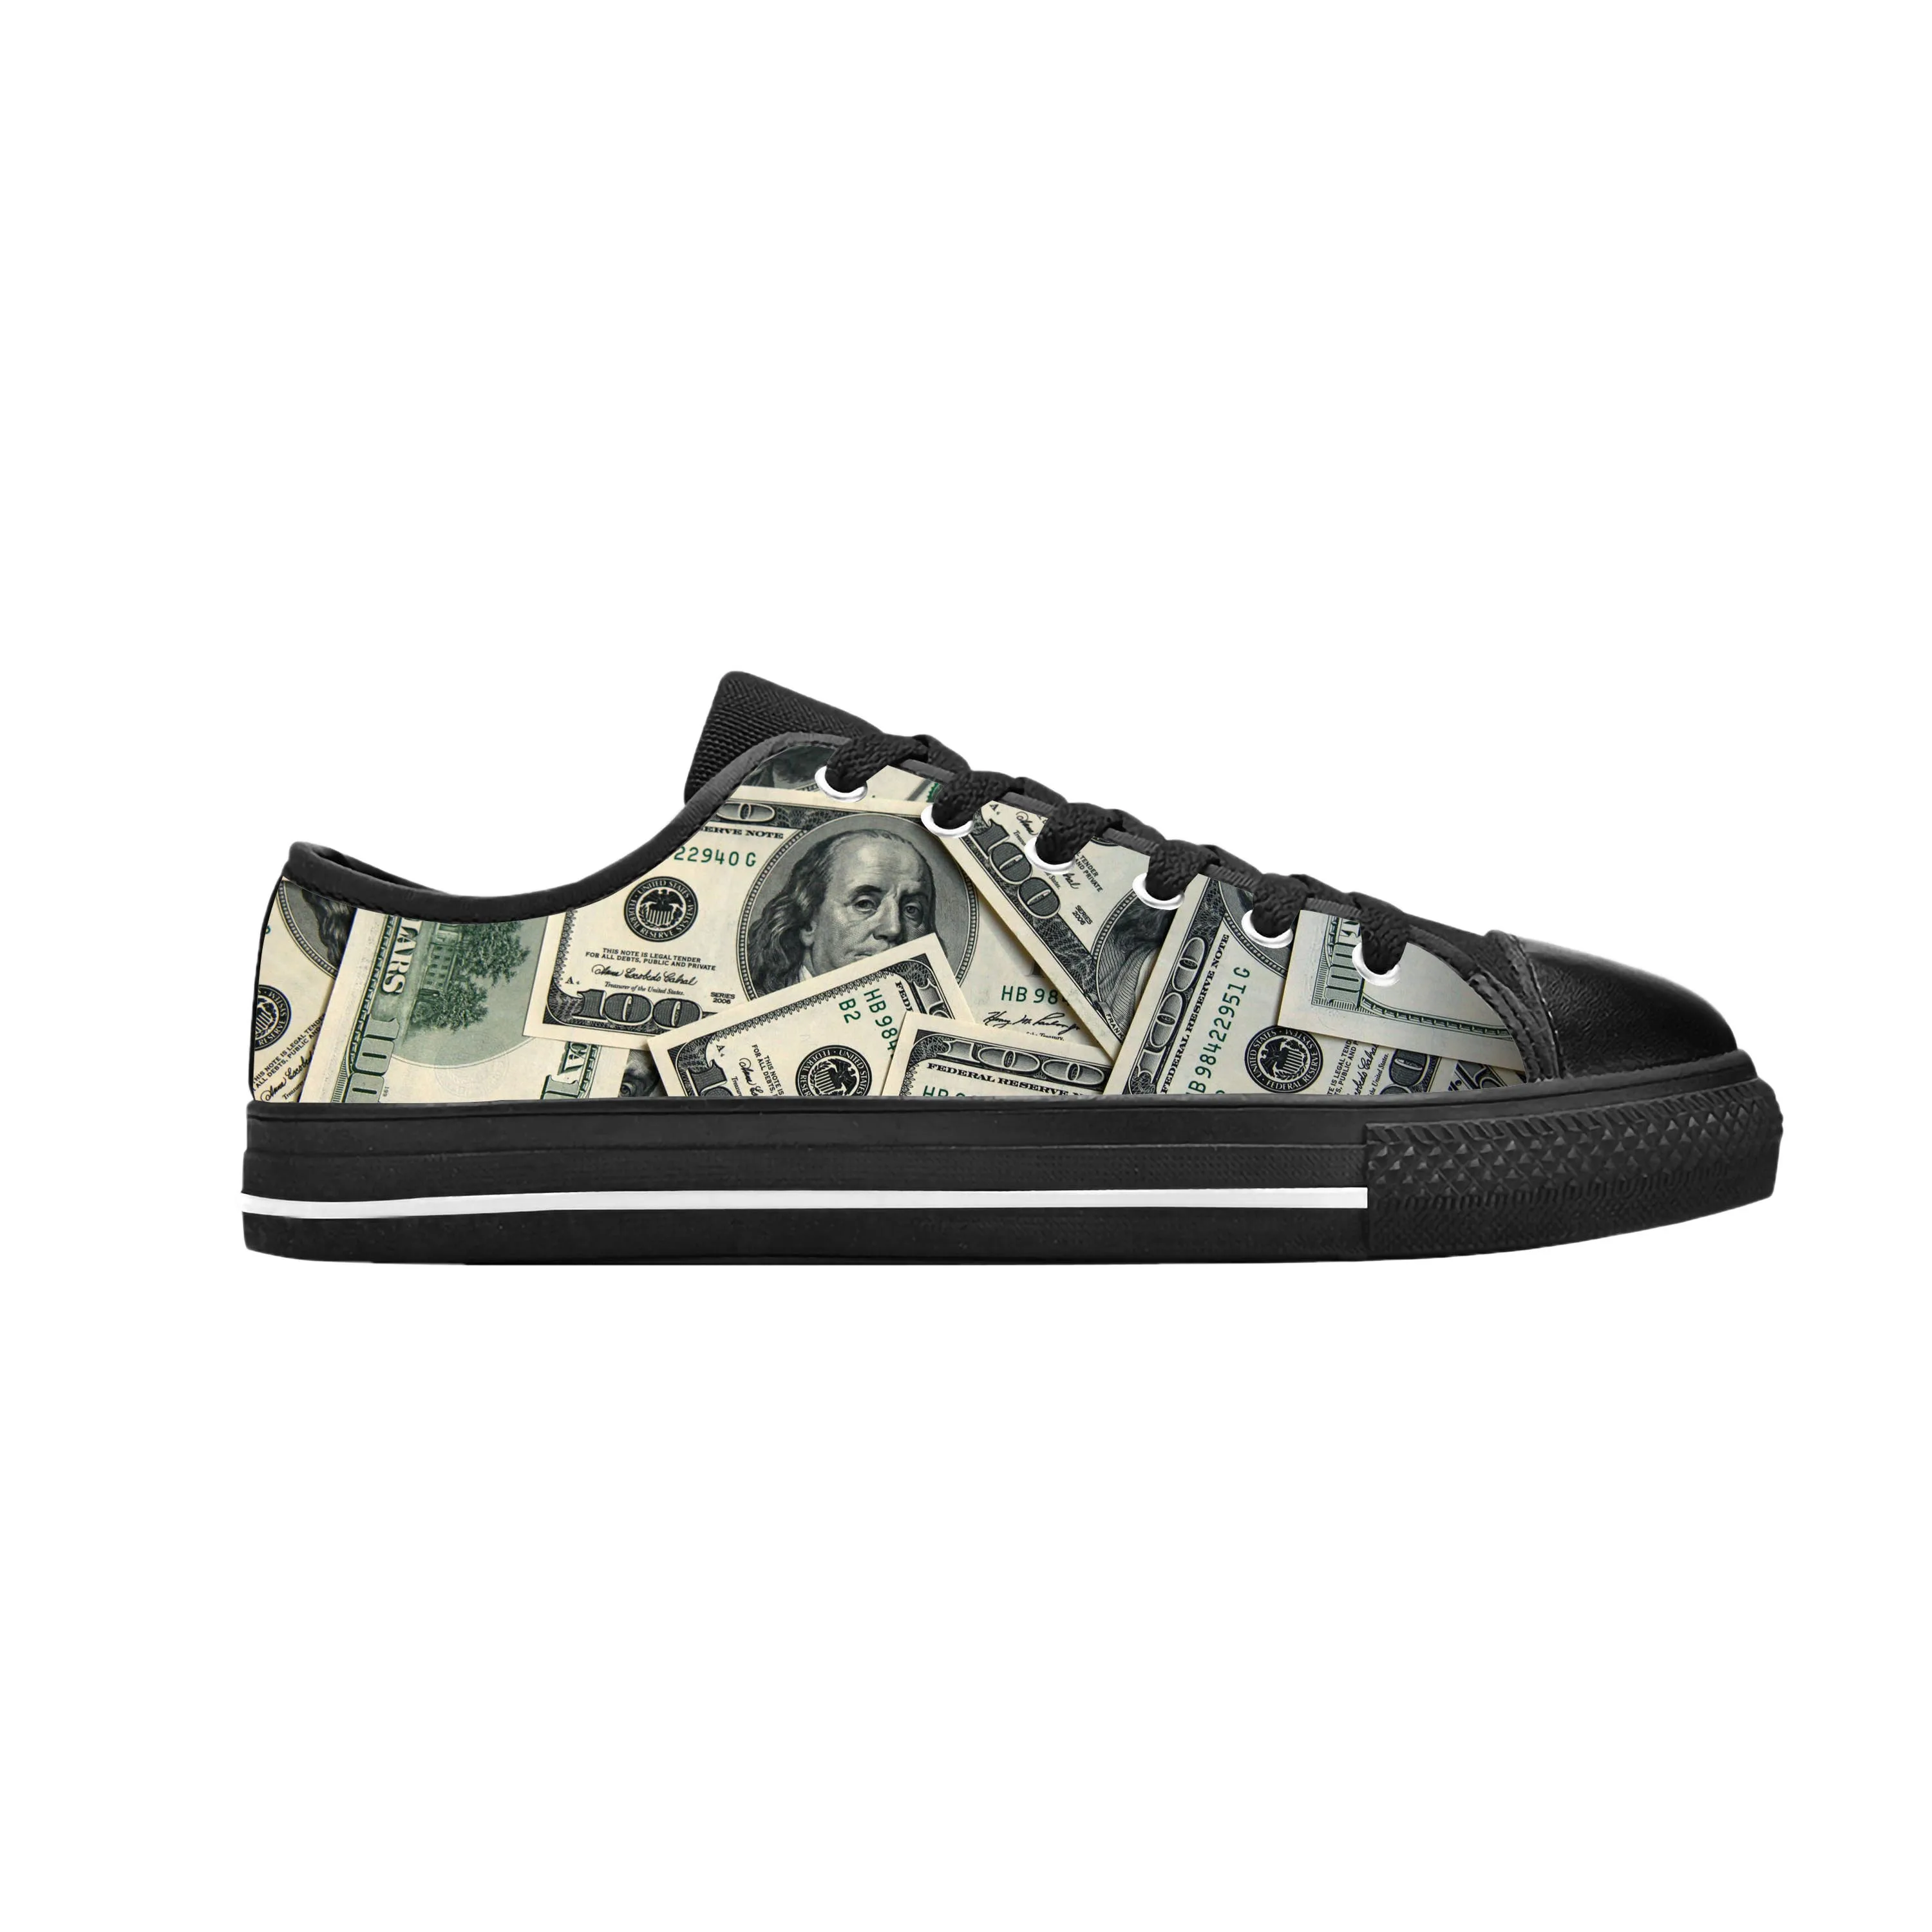 Gothic Dollar Bills Dollars Money Pattern Fashion Casual Cloth Shoes Low Top Comfortable Breathable 3D Print Men Women Sneakers saw movie horror jigsaw puppet halloween gothic casual cloth shoes low top comfortable breathable 3d print men women sneakers